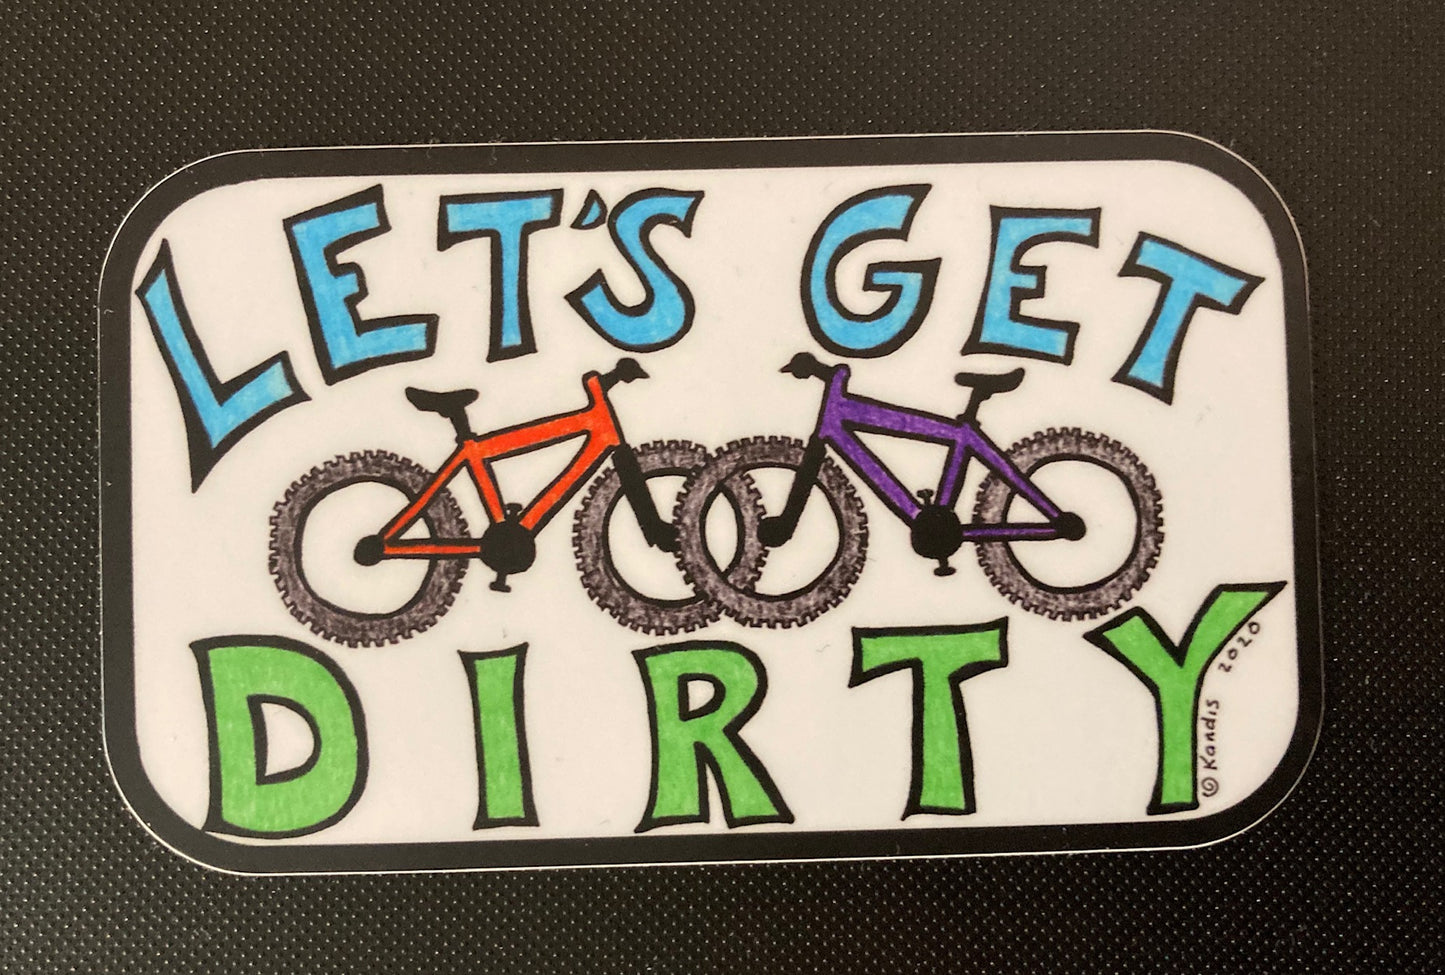 Let's Get Dirty